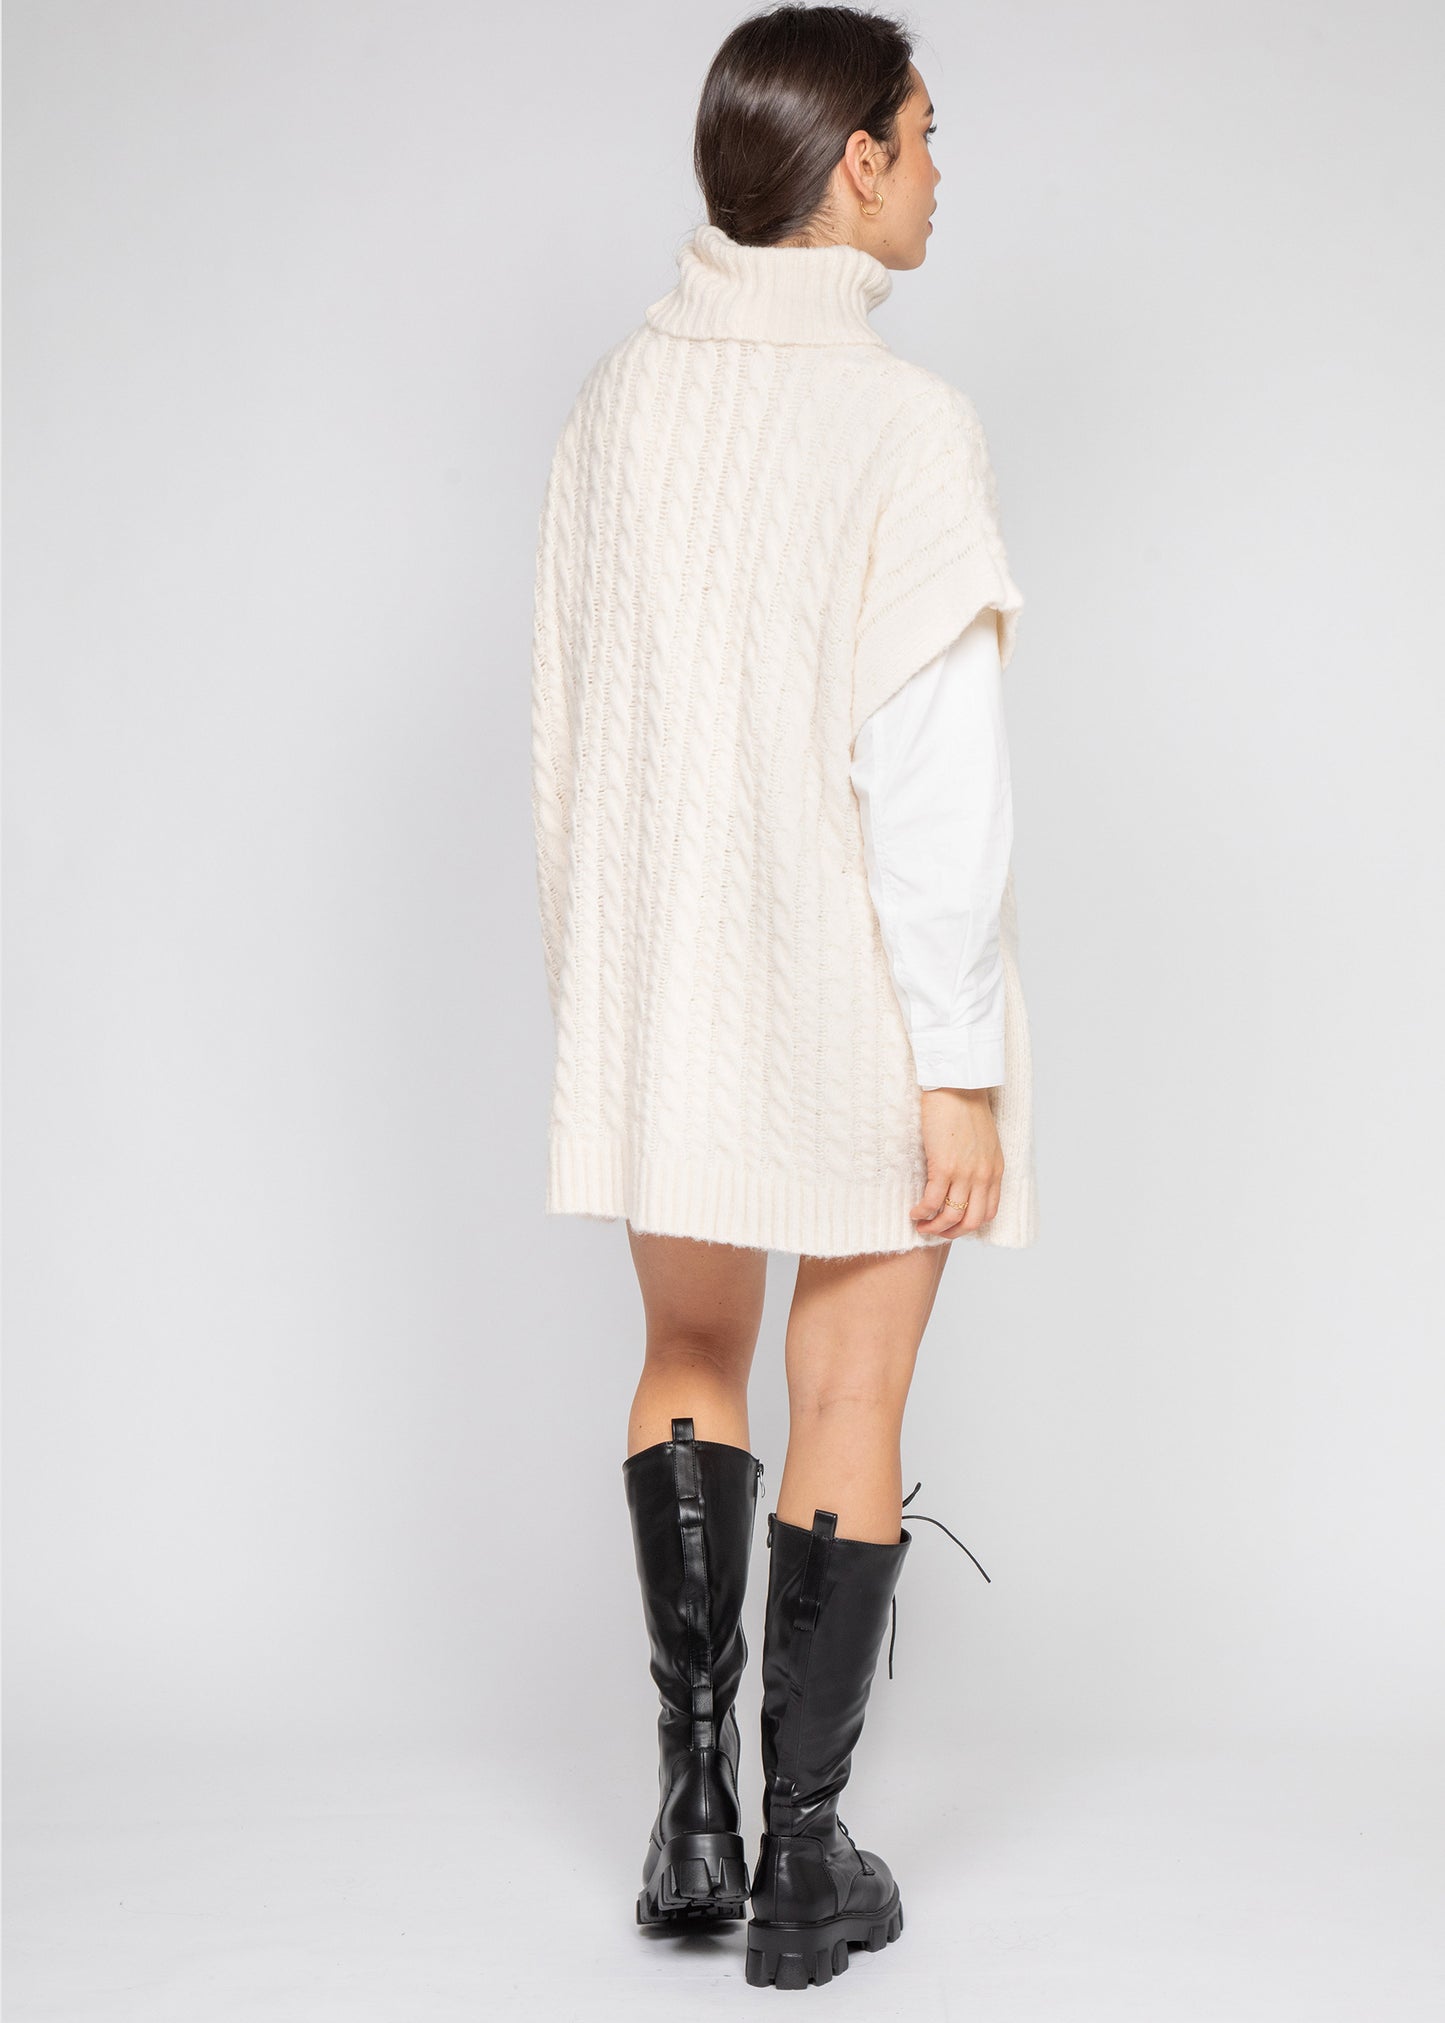 Sleeveless cable knit jumper dress